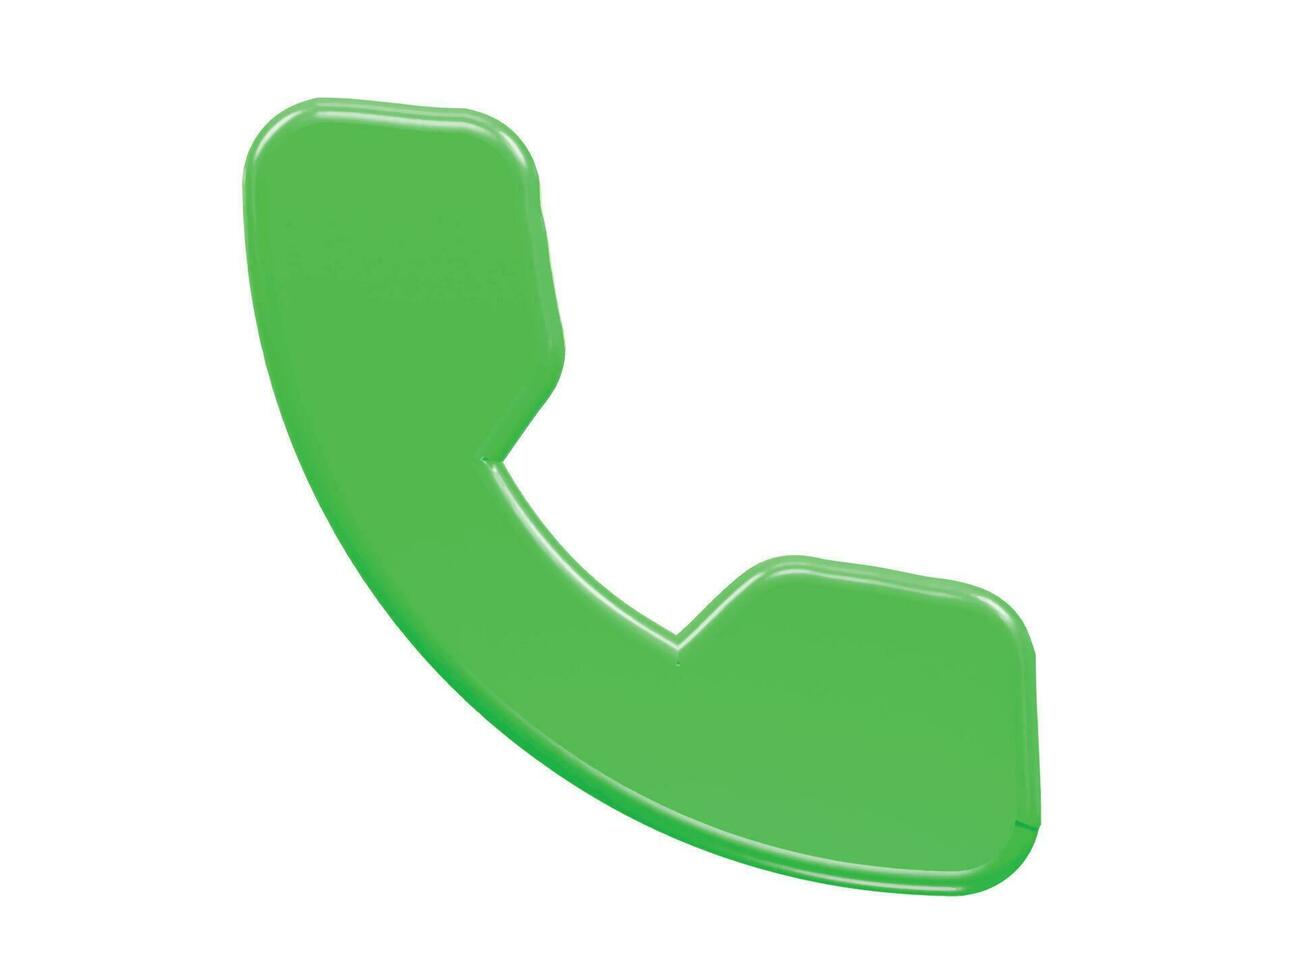 Phone icon 3d rendering vector illustration